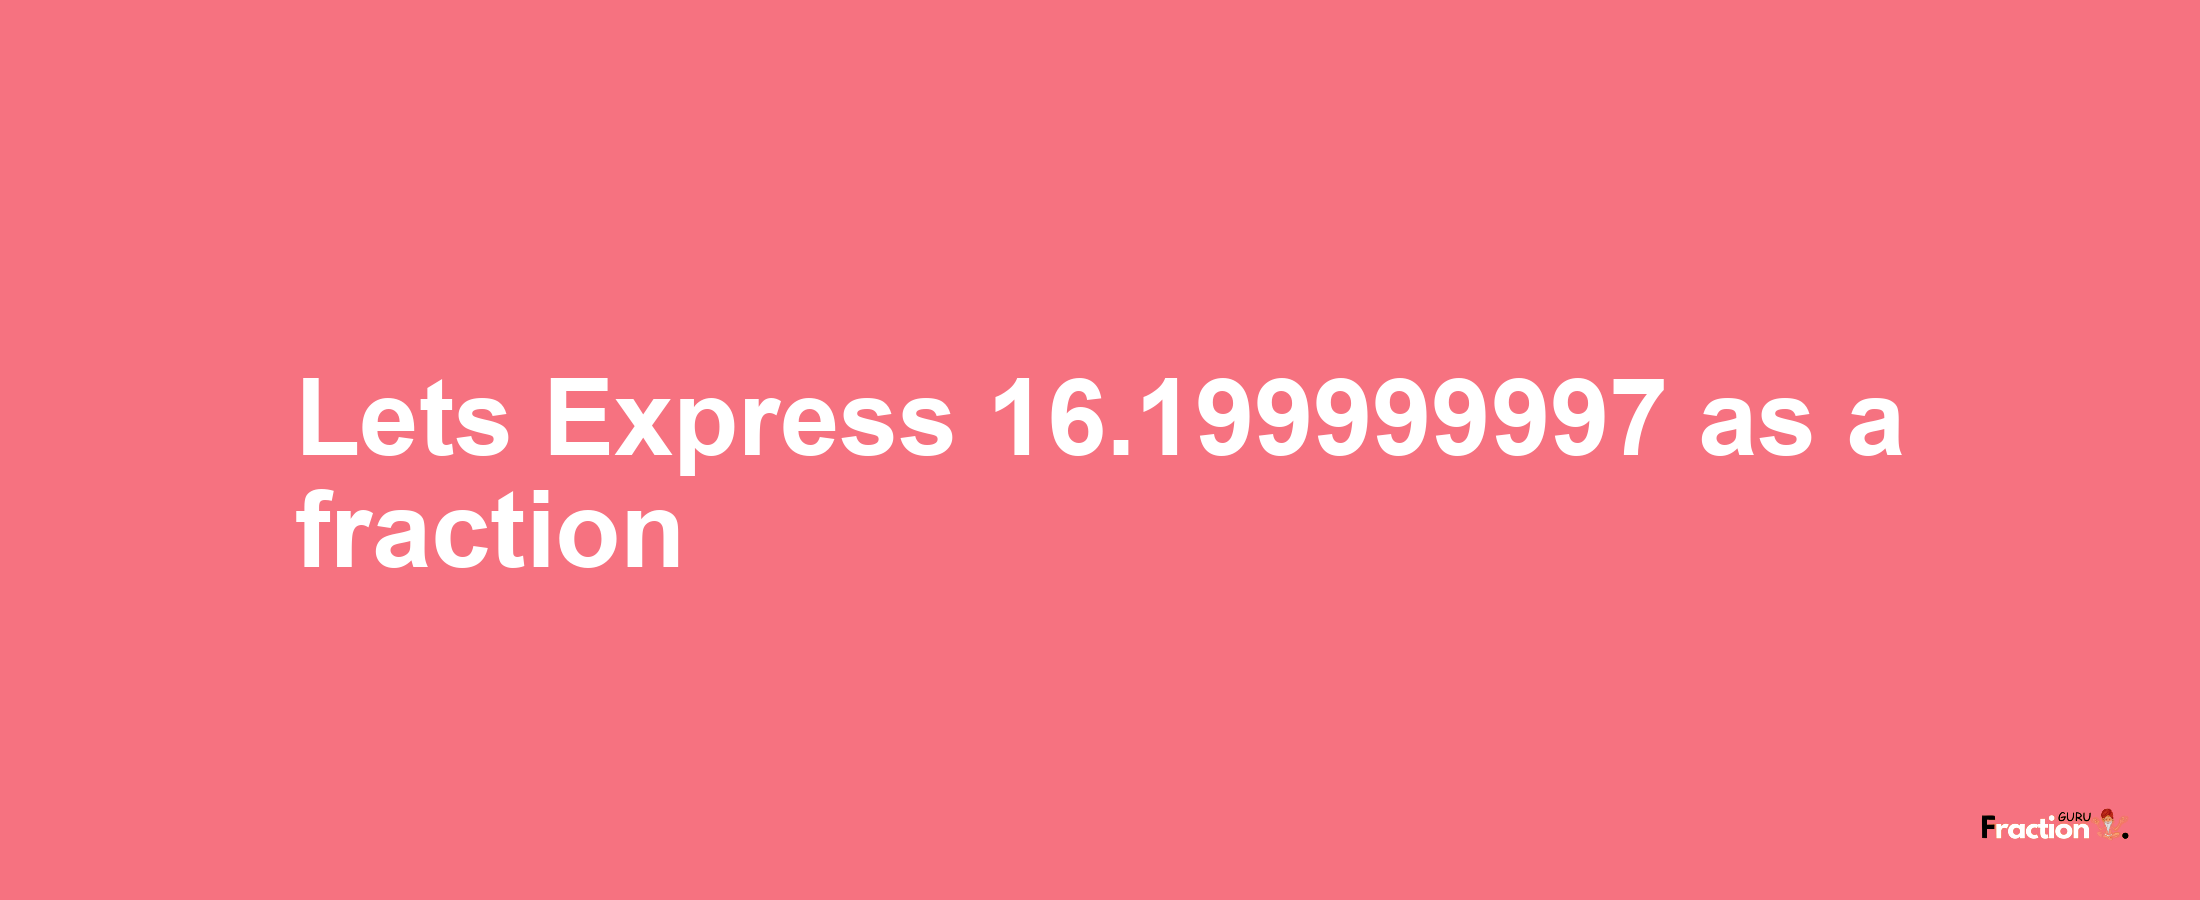 Lets Express 16.199999997 as afraction